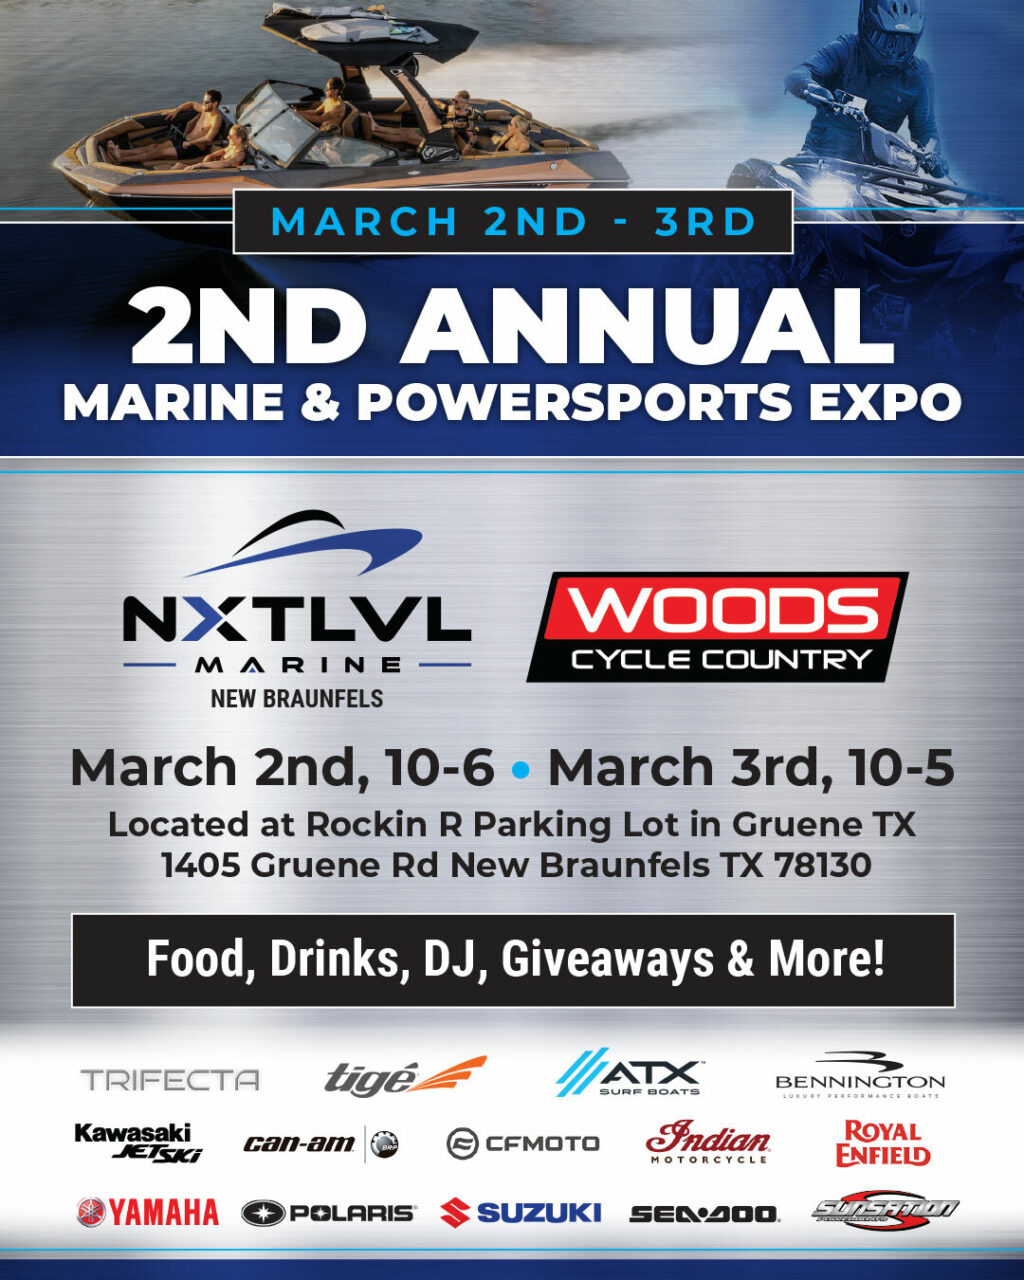 2nd Annual Marine & Powersports Expo